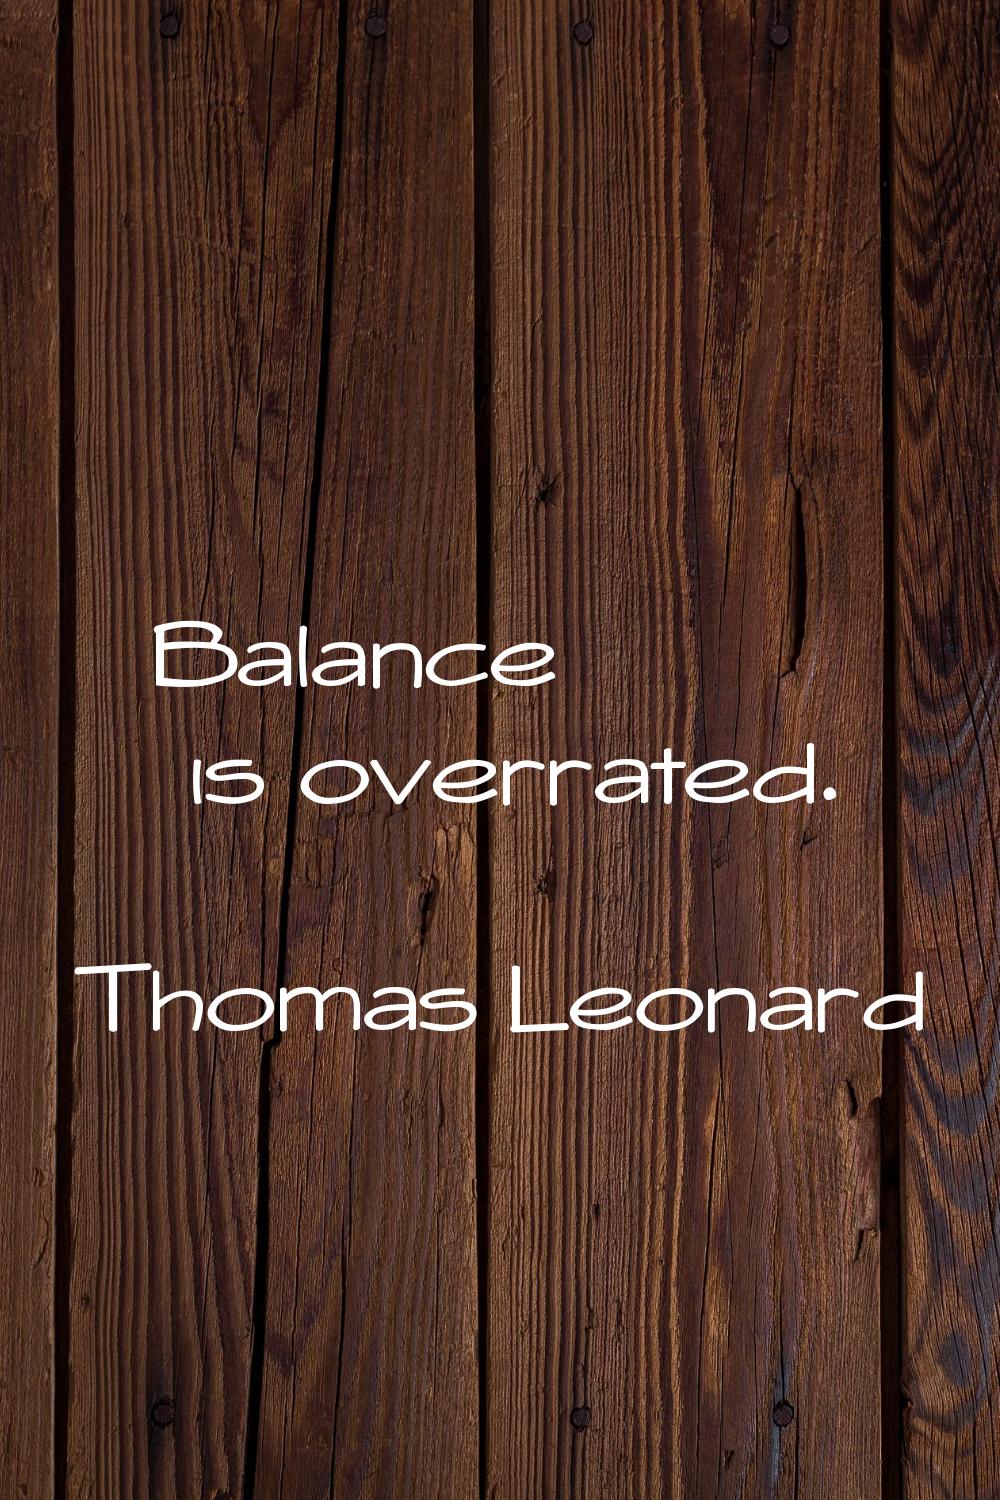 Balance is overrated.